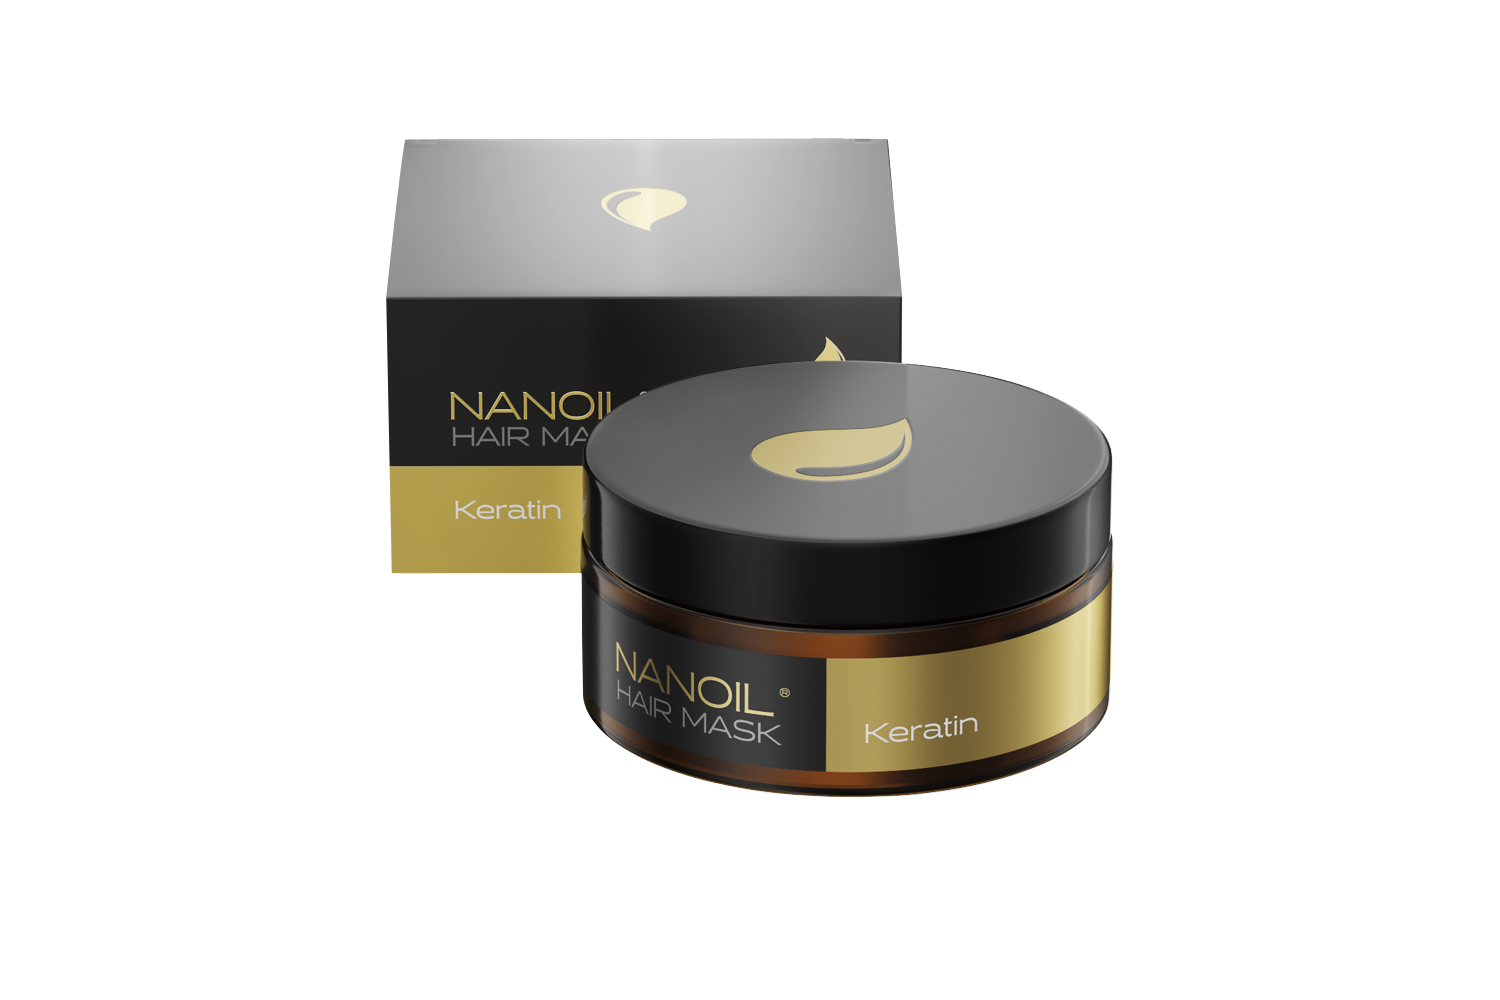 Keratin hair mask by Nanoil. The best choice that you can make to improve the strands overnight